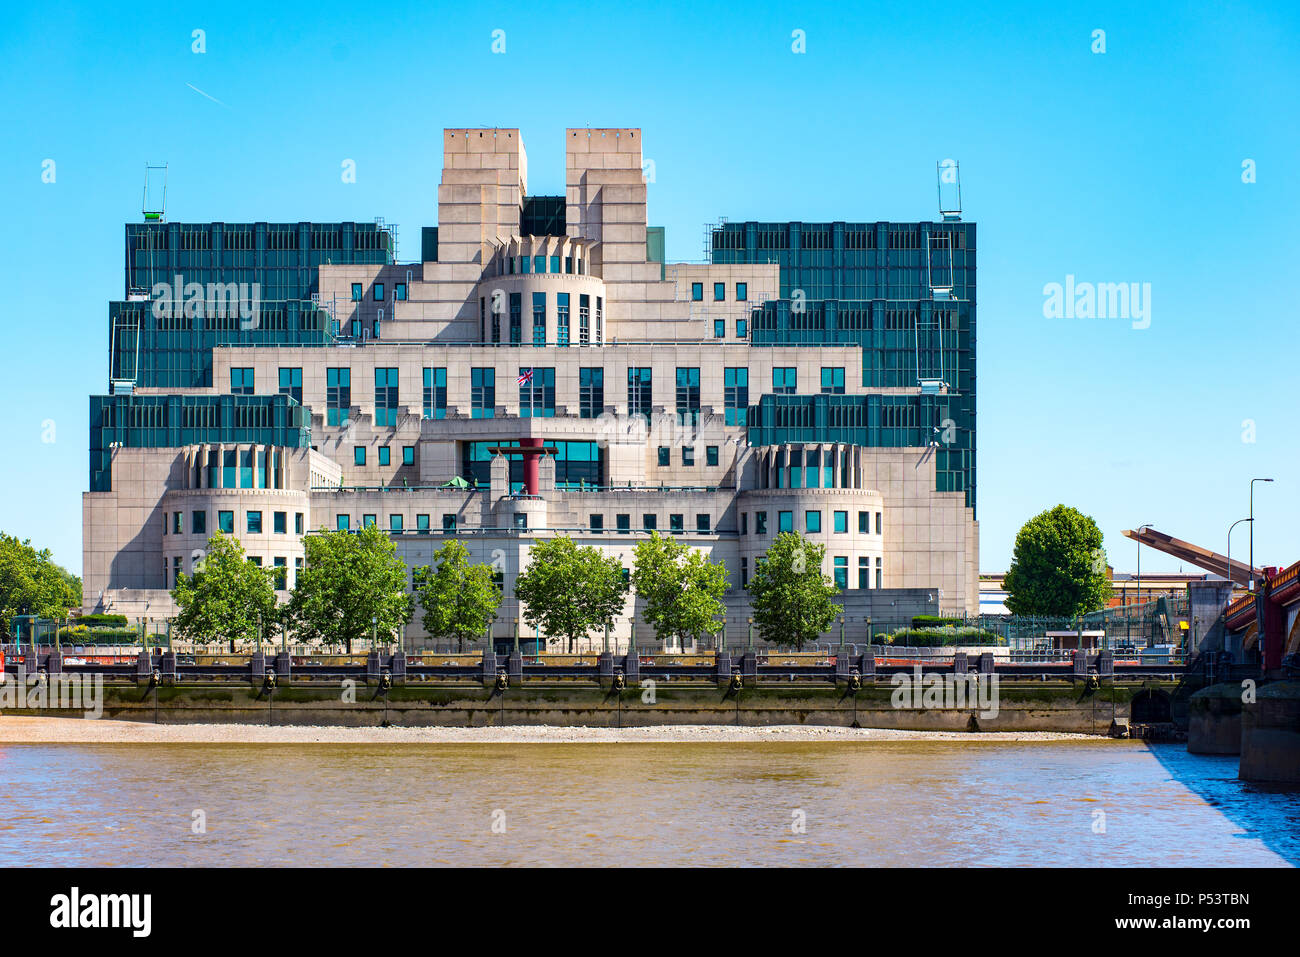 LONDON, UK - 18JUN2018: HM The SIS Building at Albert Embankment, Vauxhall is the headquarters of MI6. Seen across the river from Millbank. Stock Photo